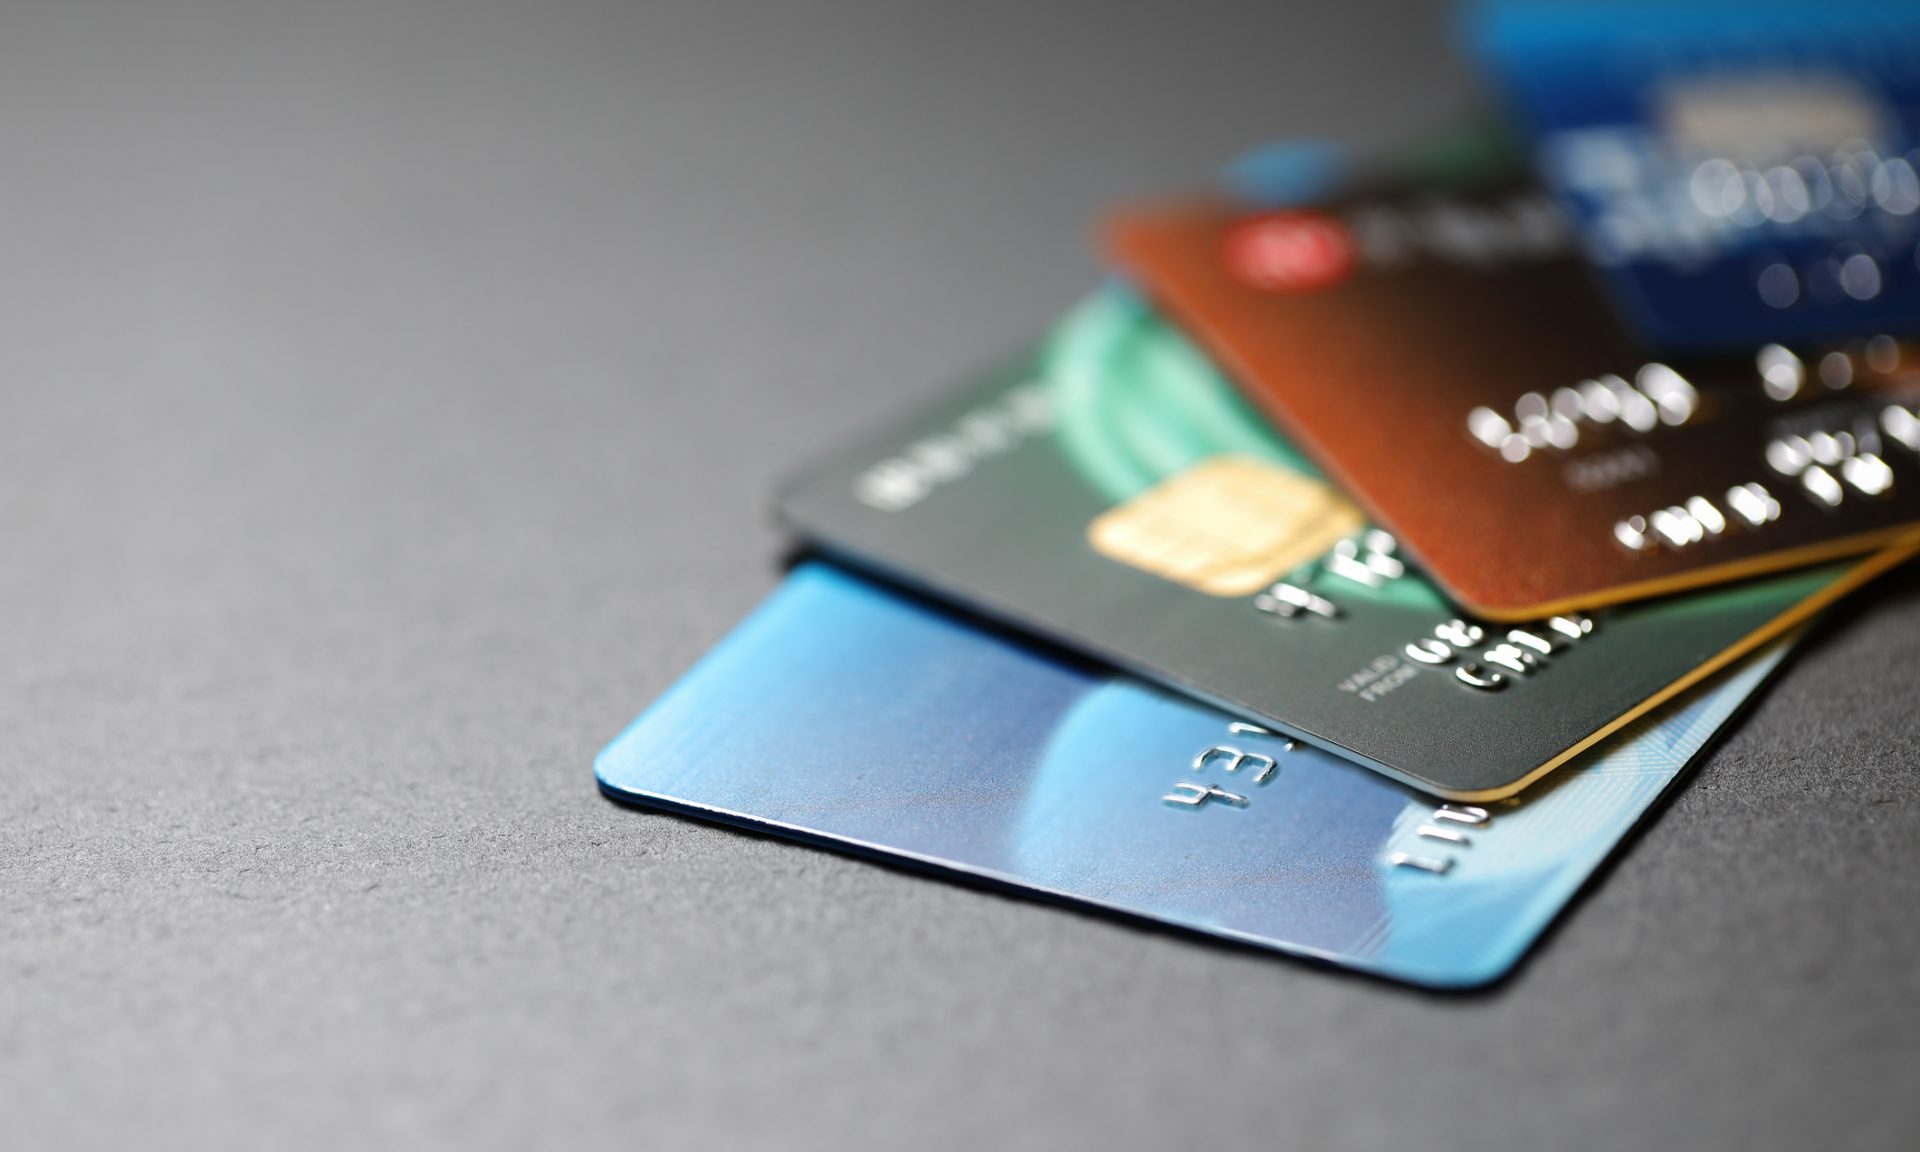 Finding the right credit card: here's what you should look out for